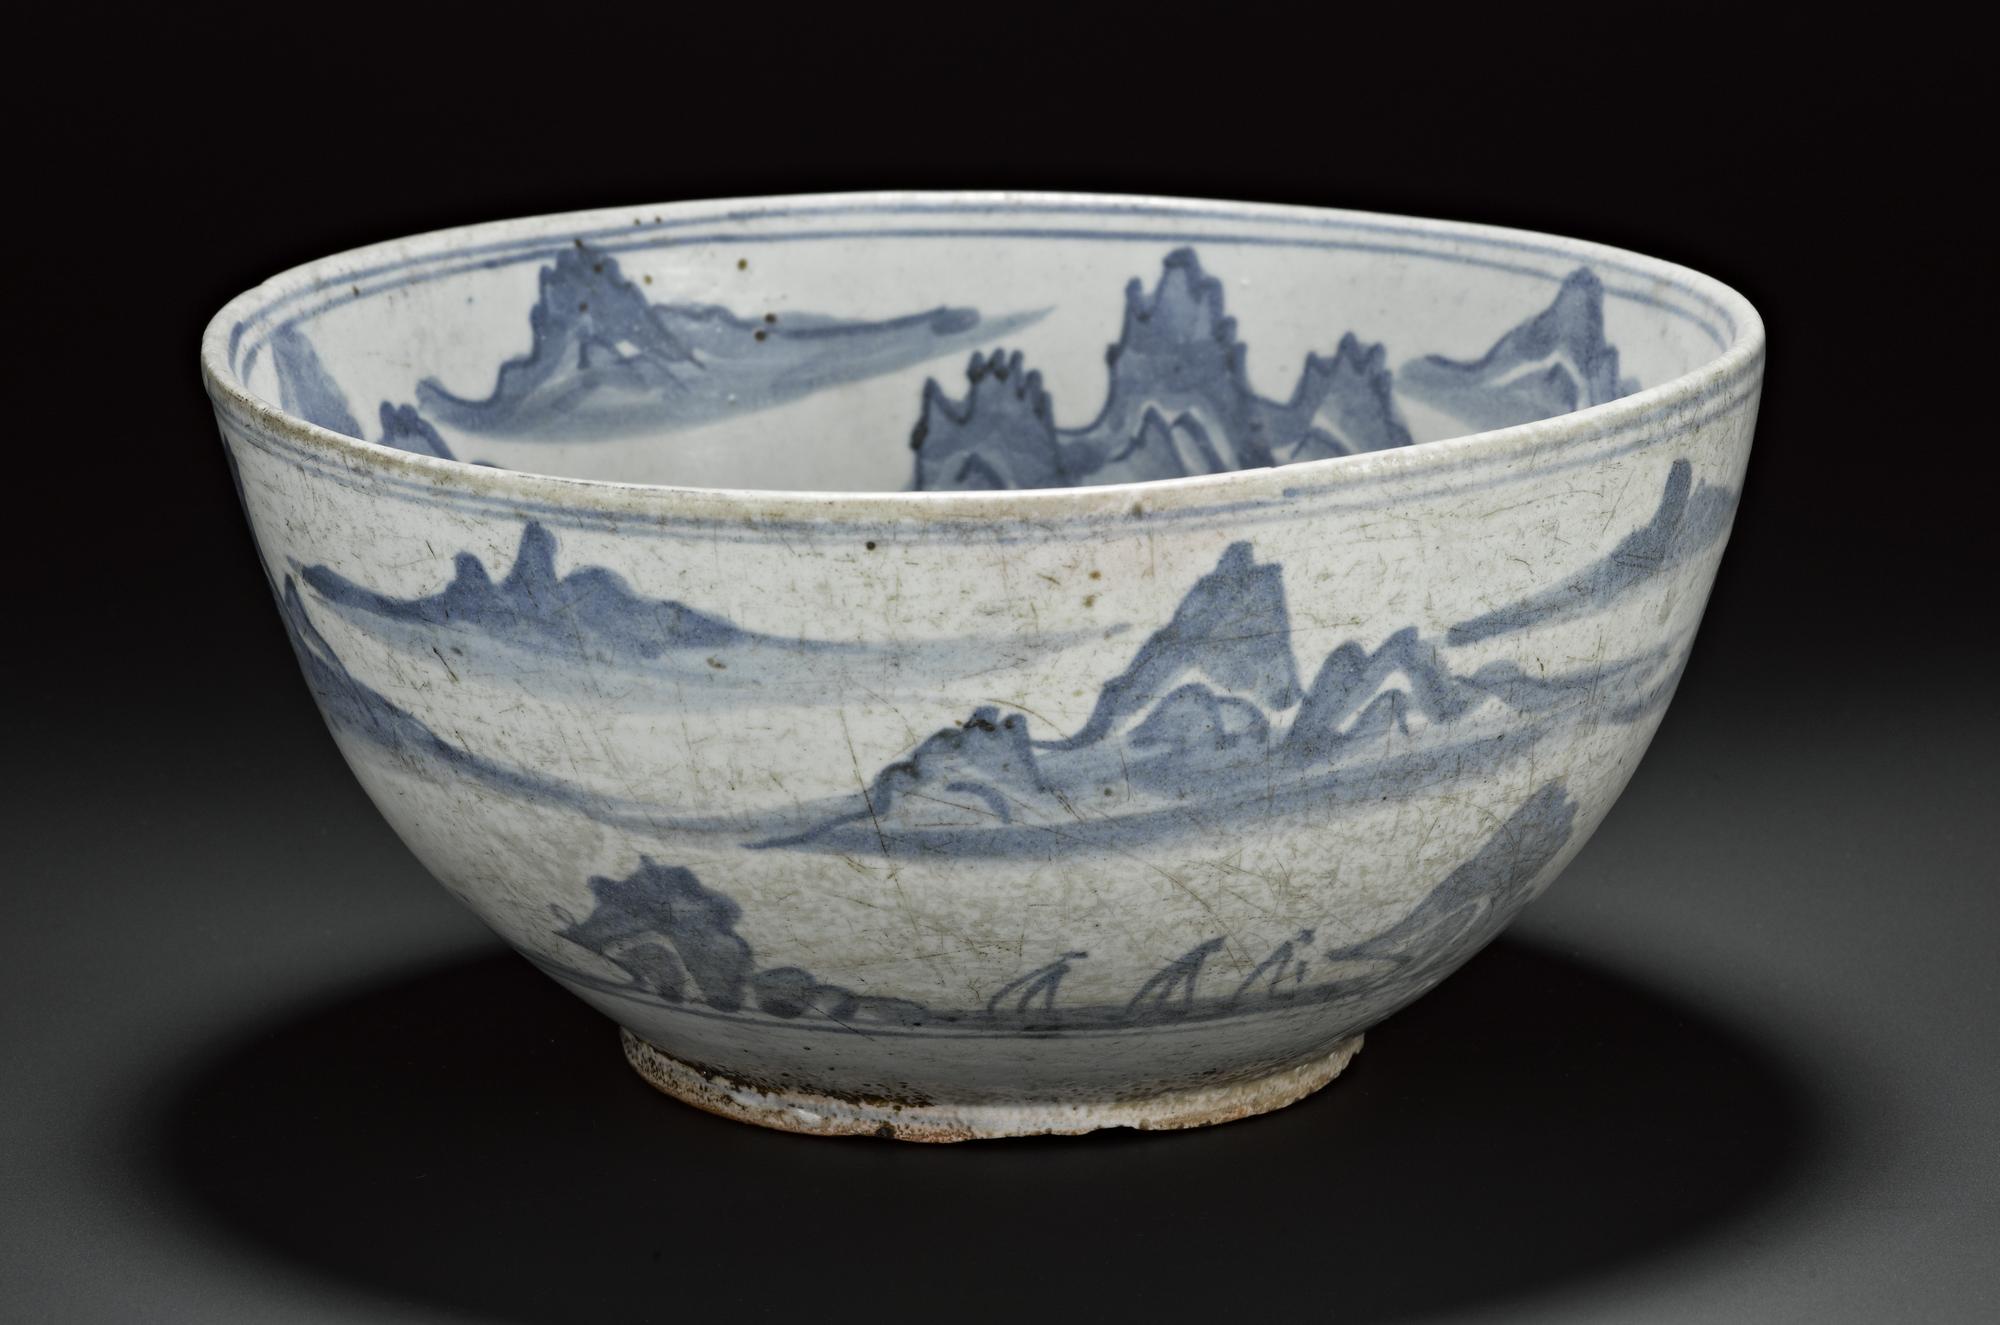 Porcellanous stoneware bowl with a red coloured body, and a green-white glaze, with uniform pale blue decoration, with mountain scenery and flying crane in central roundel: Korea, 19th century.